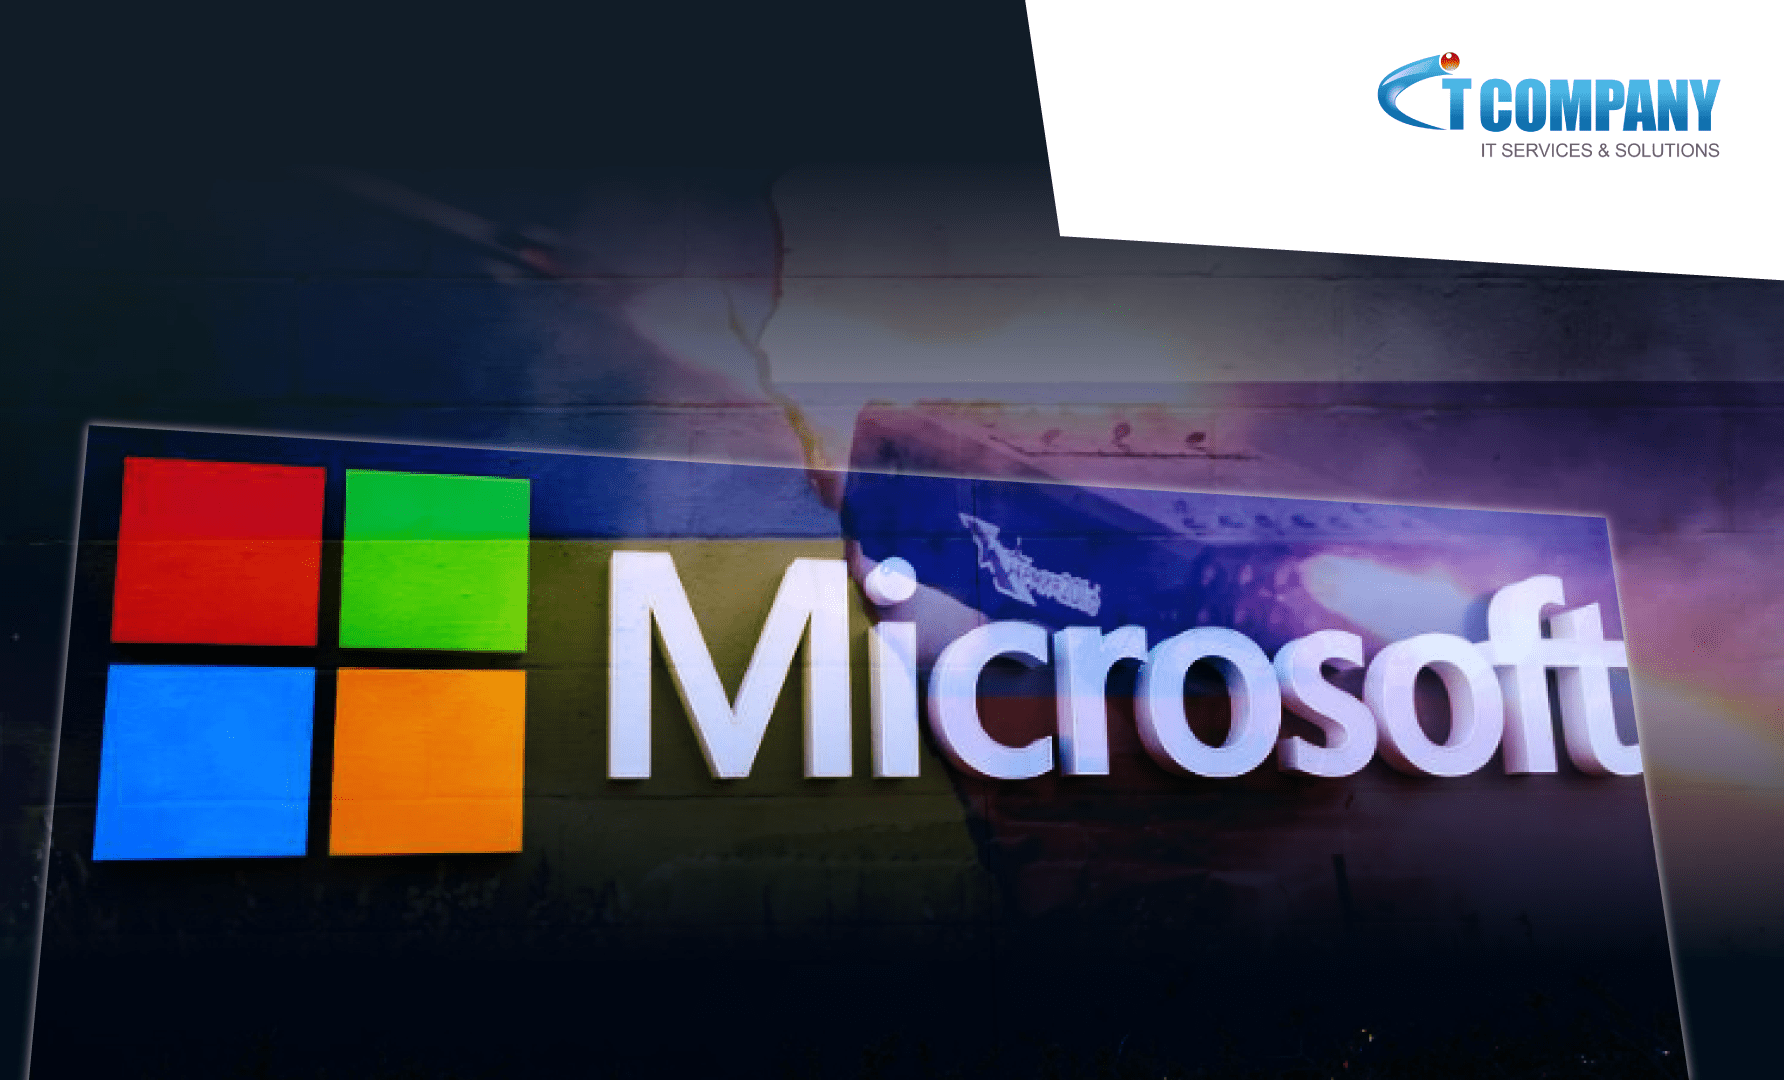 Microsoft shows its support for Ukraine by suspending sales in Russia  